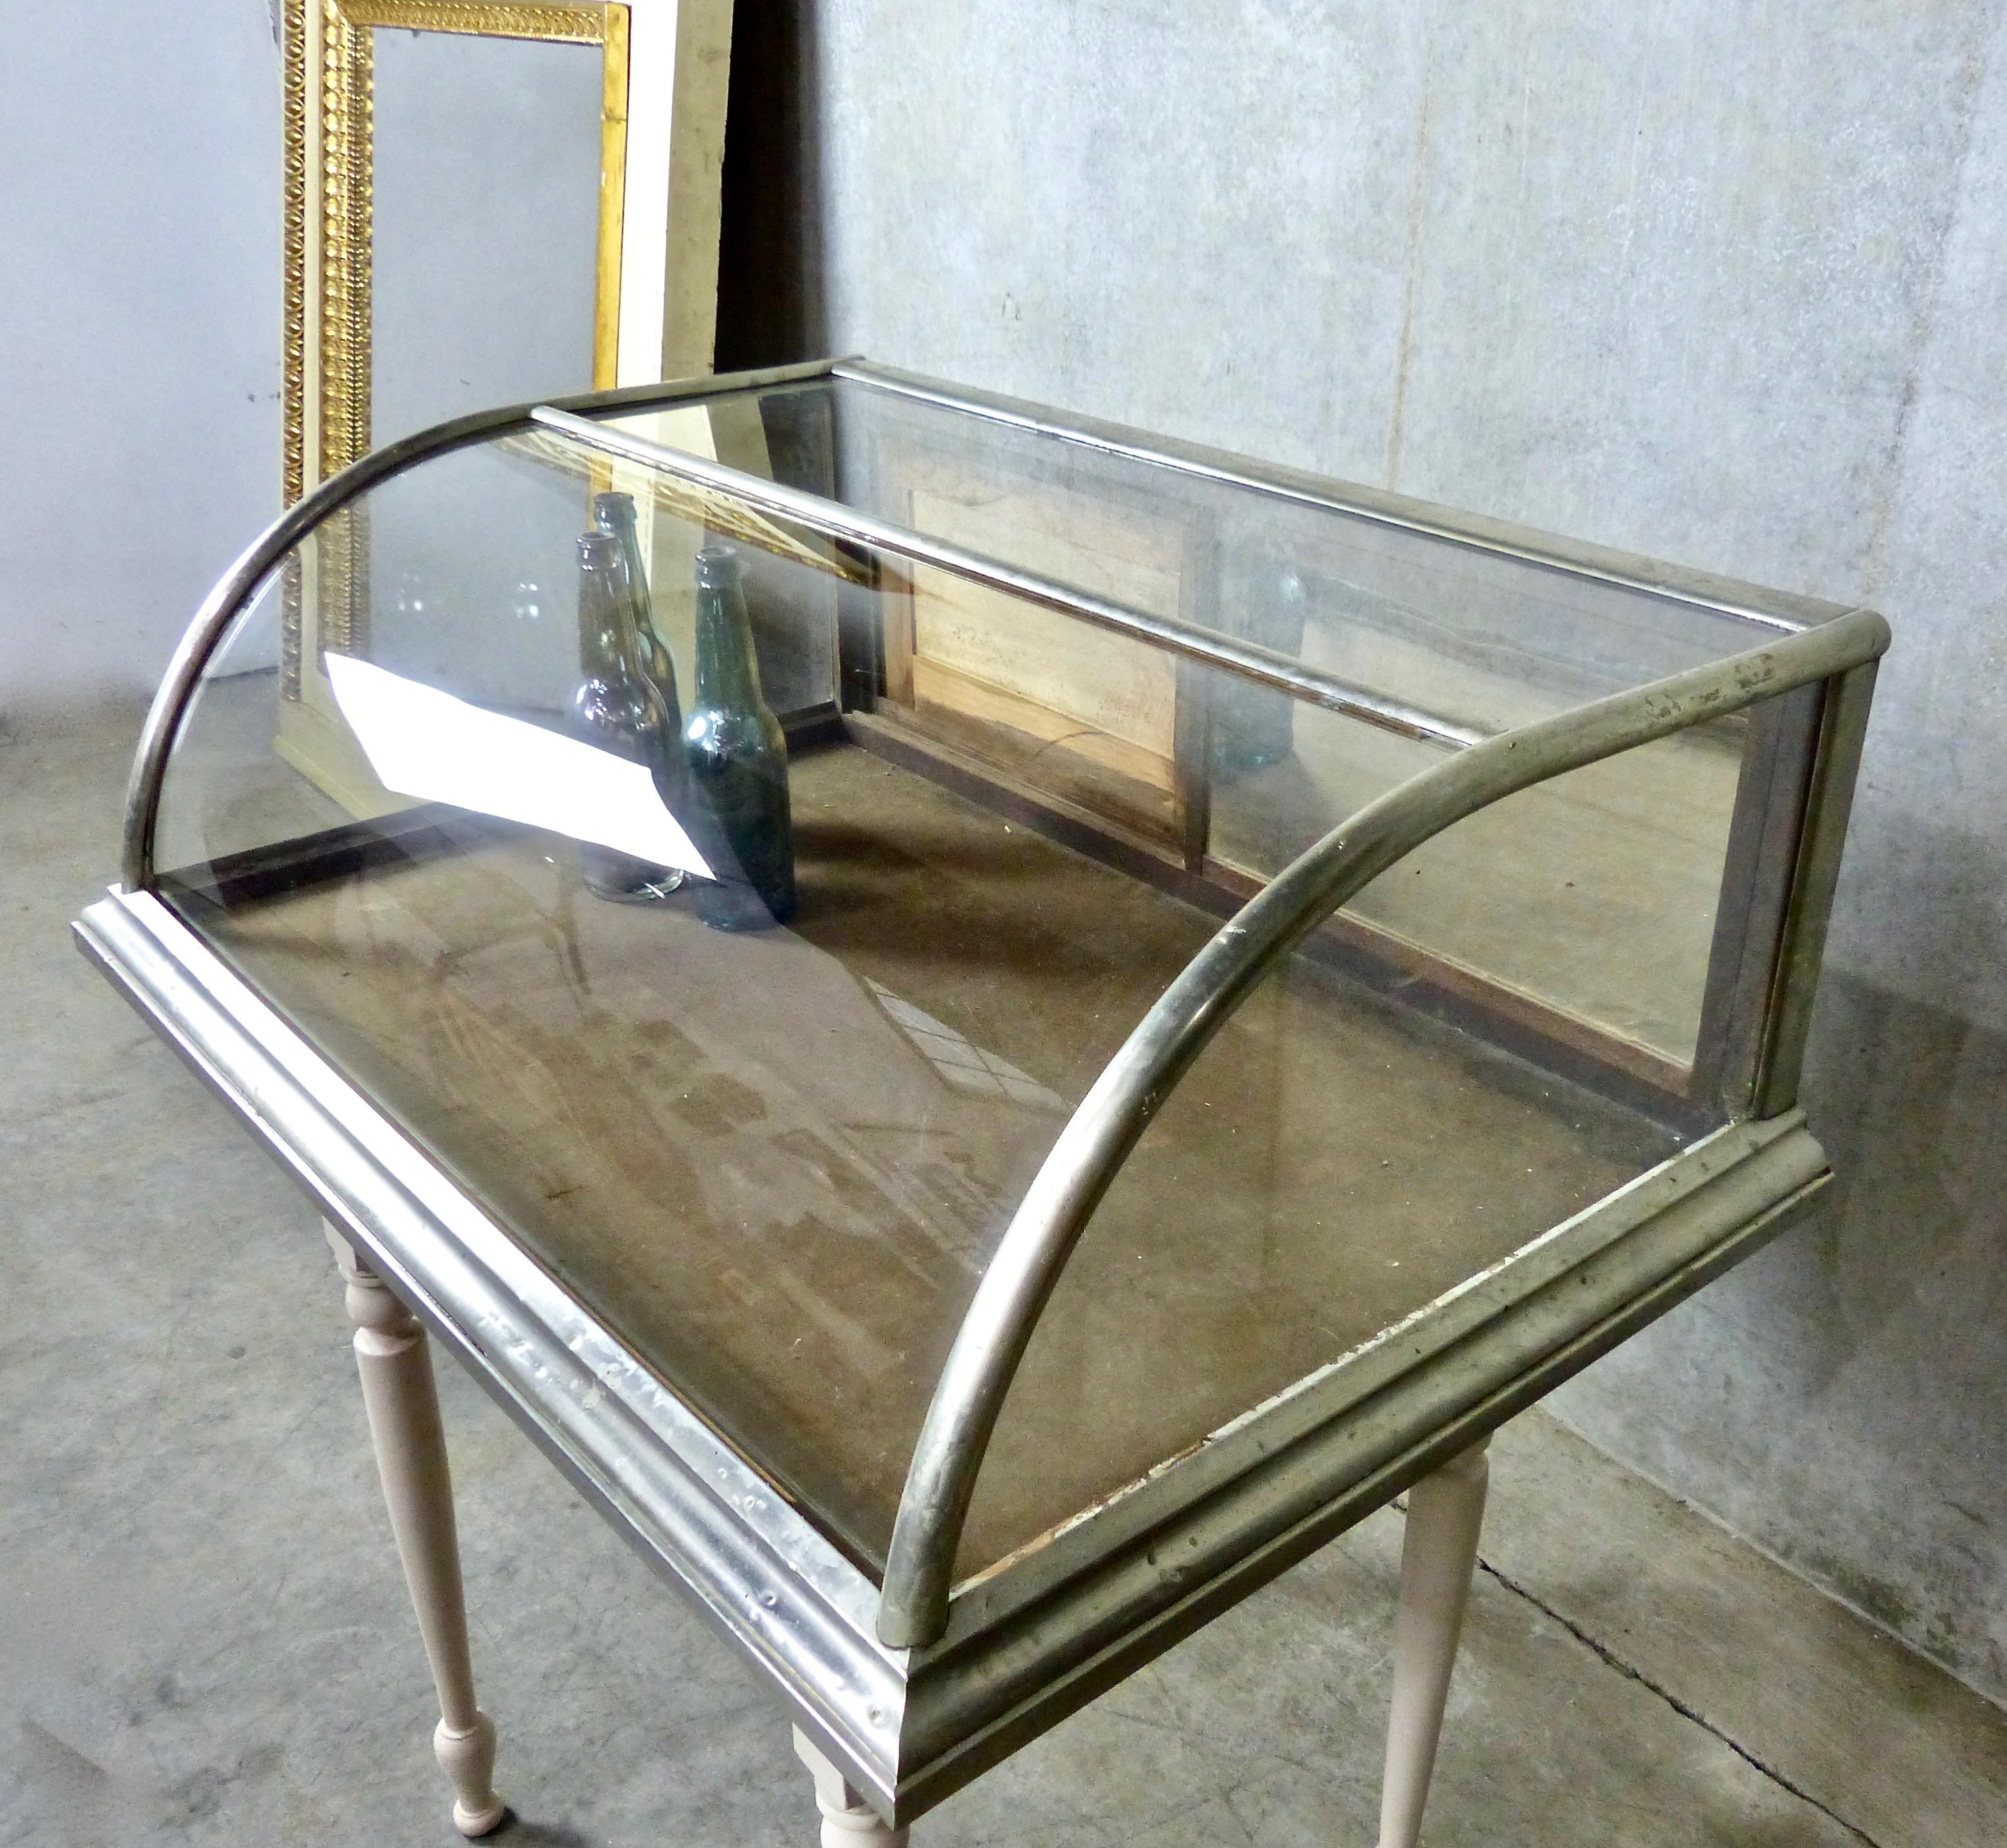 1920s Nickel-Plated Countertop Display Case by Dominion Showcase 1